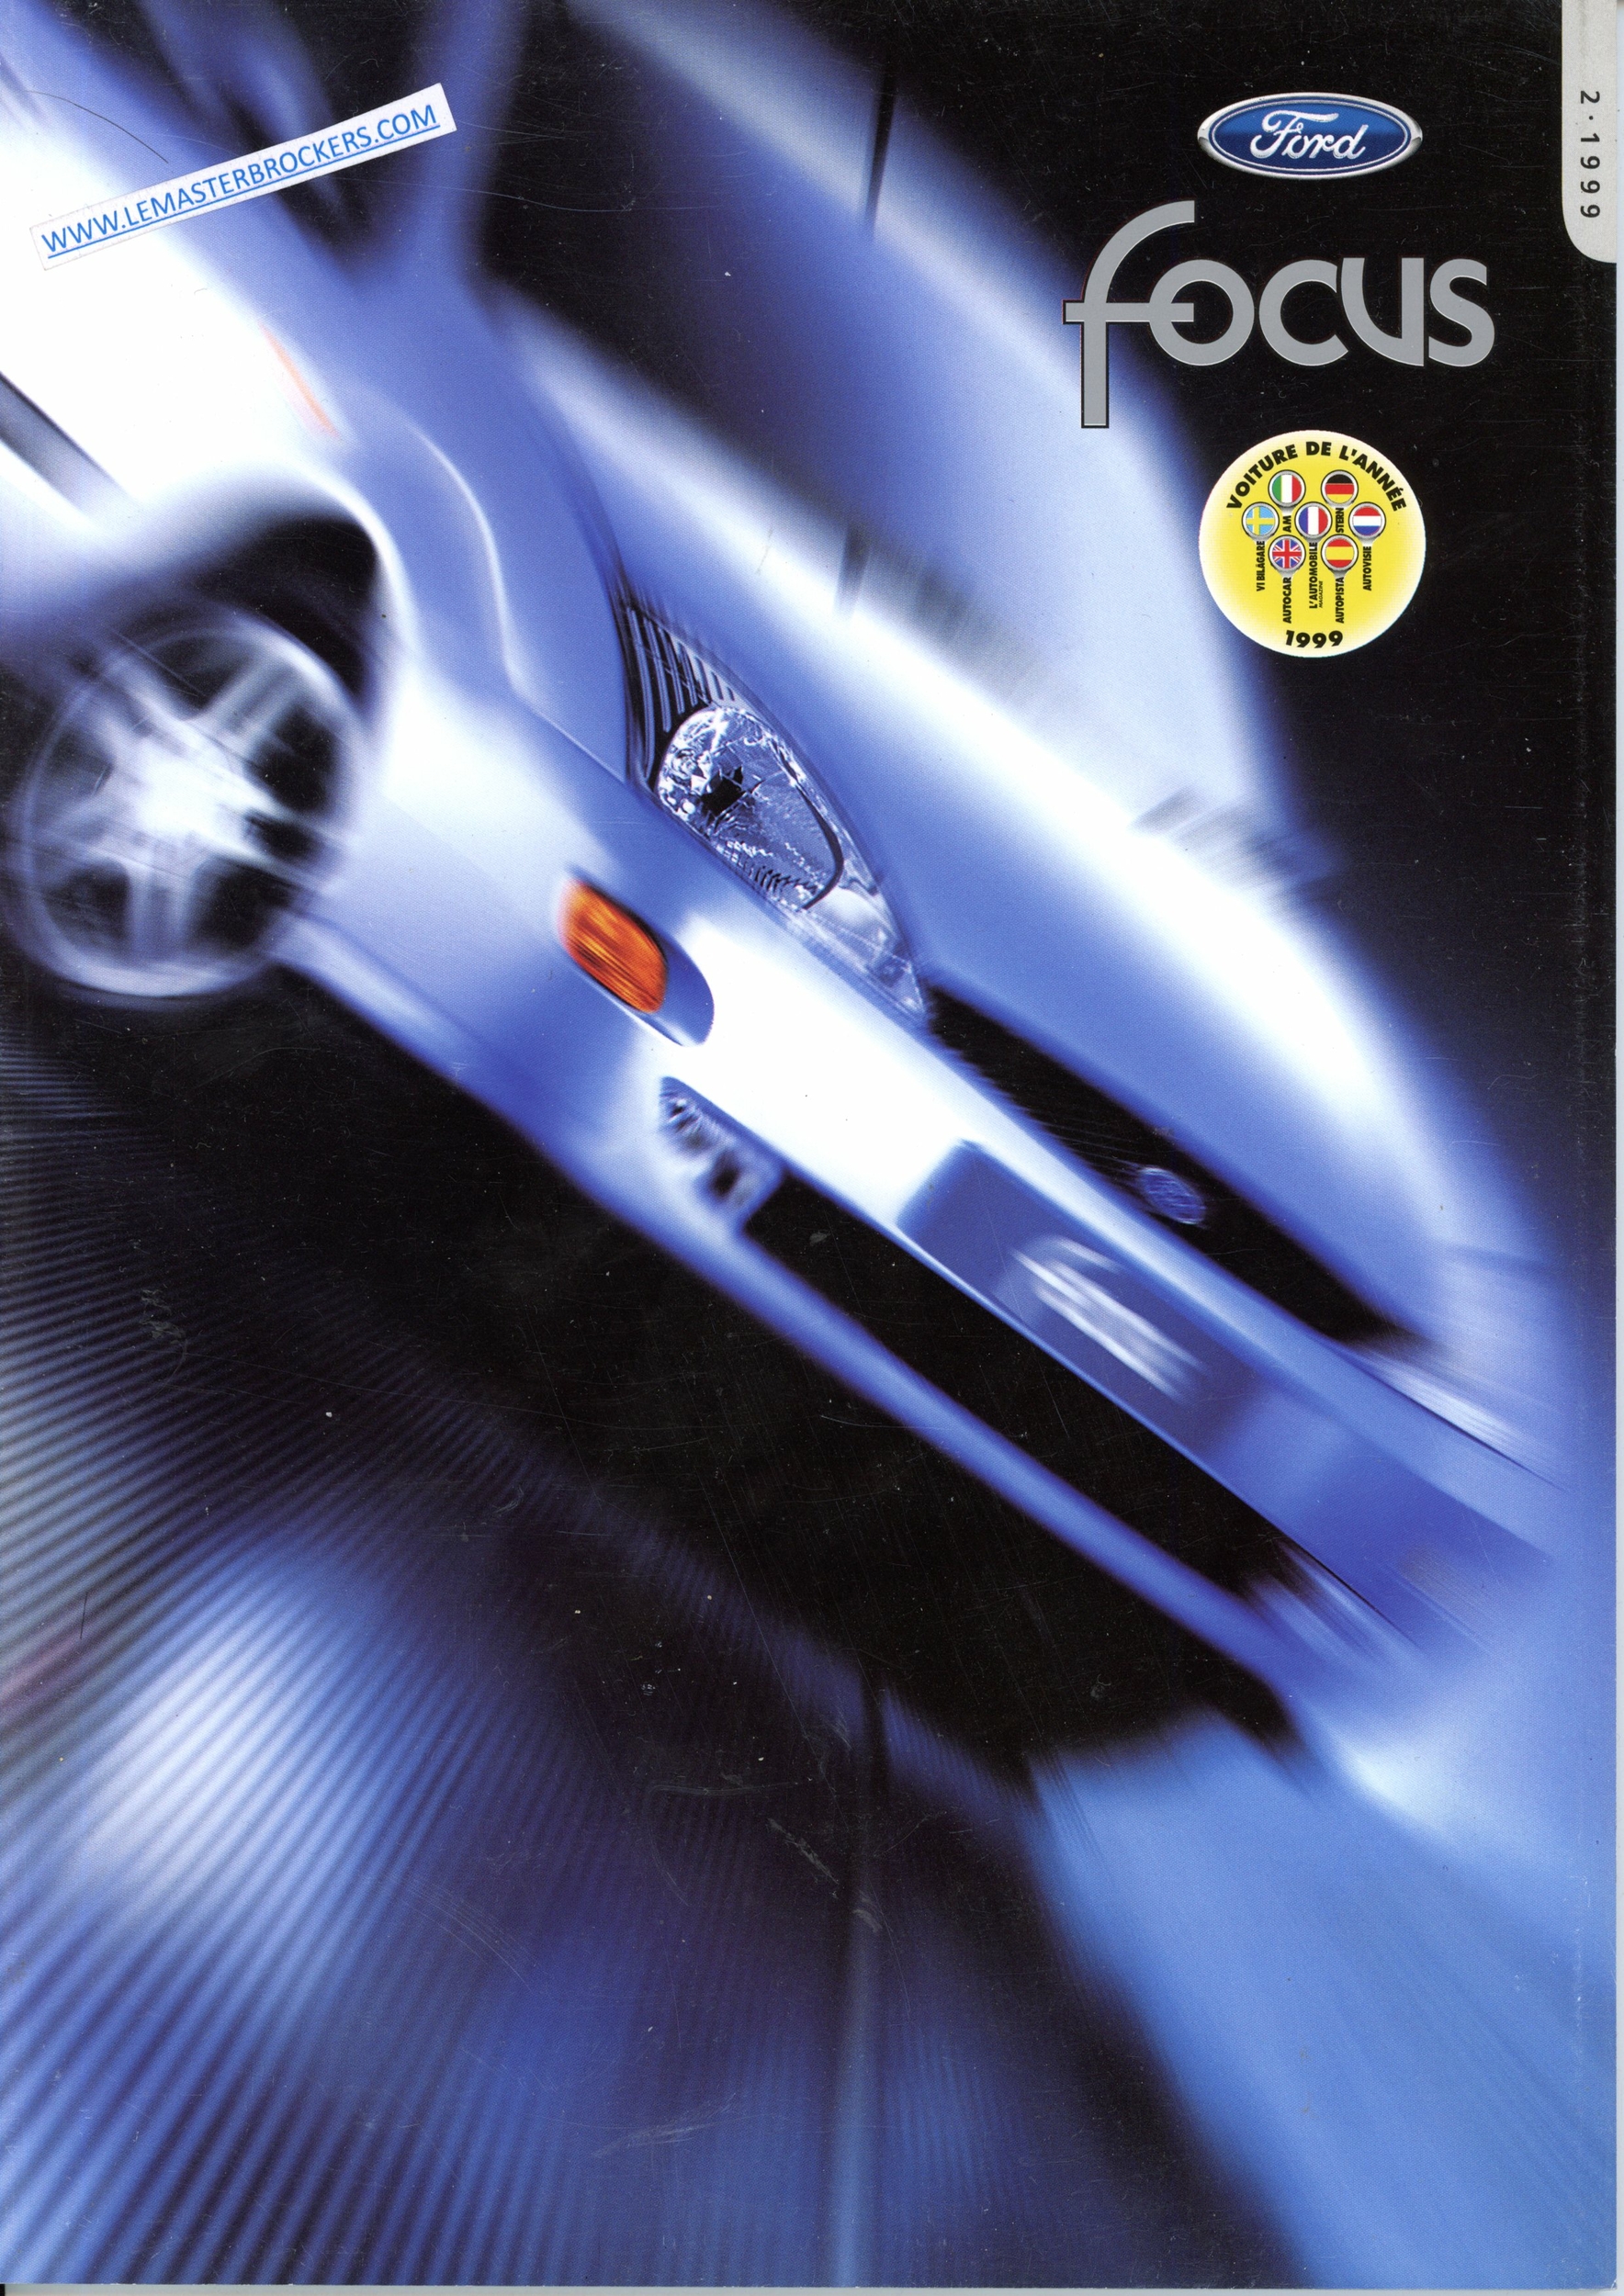 CATALOGUE FORD FOCUS 1999